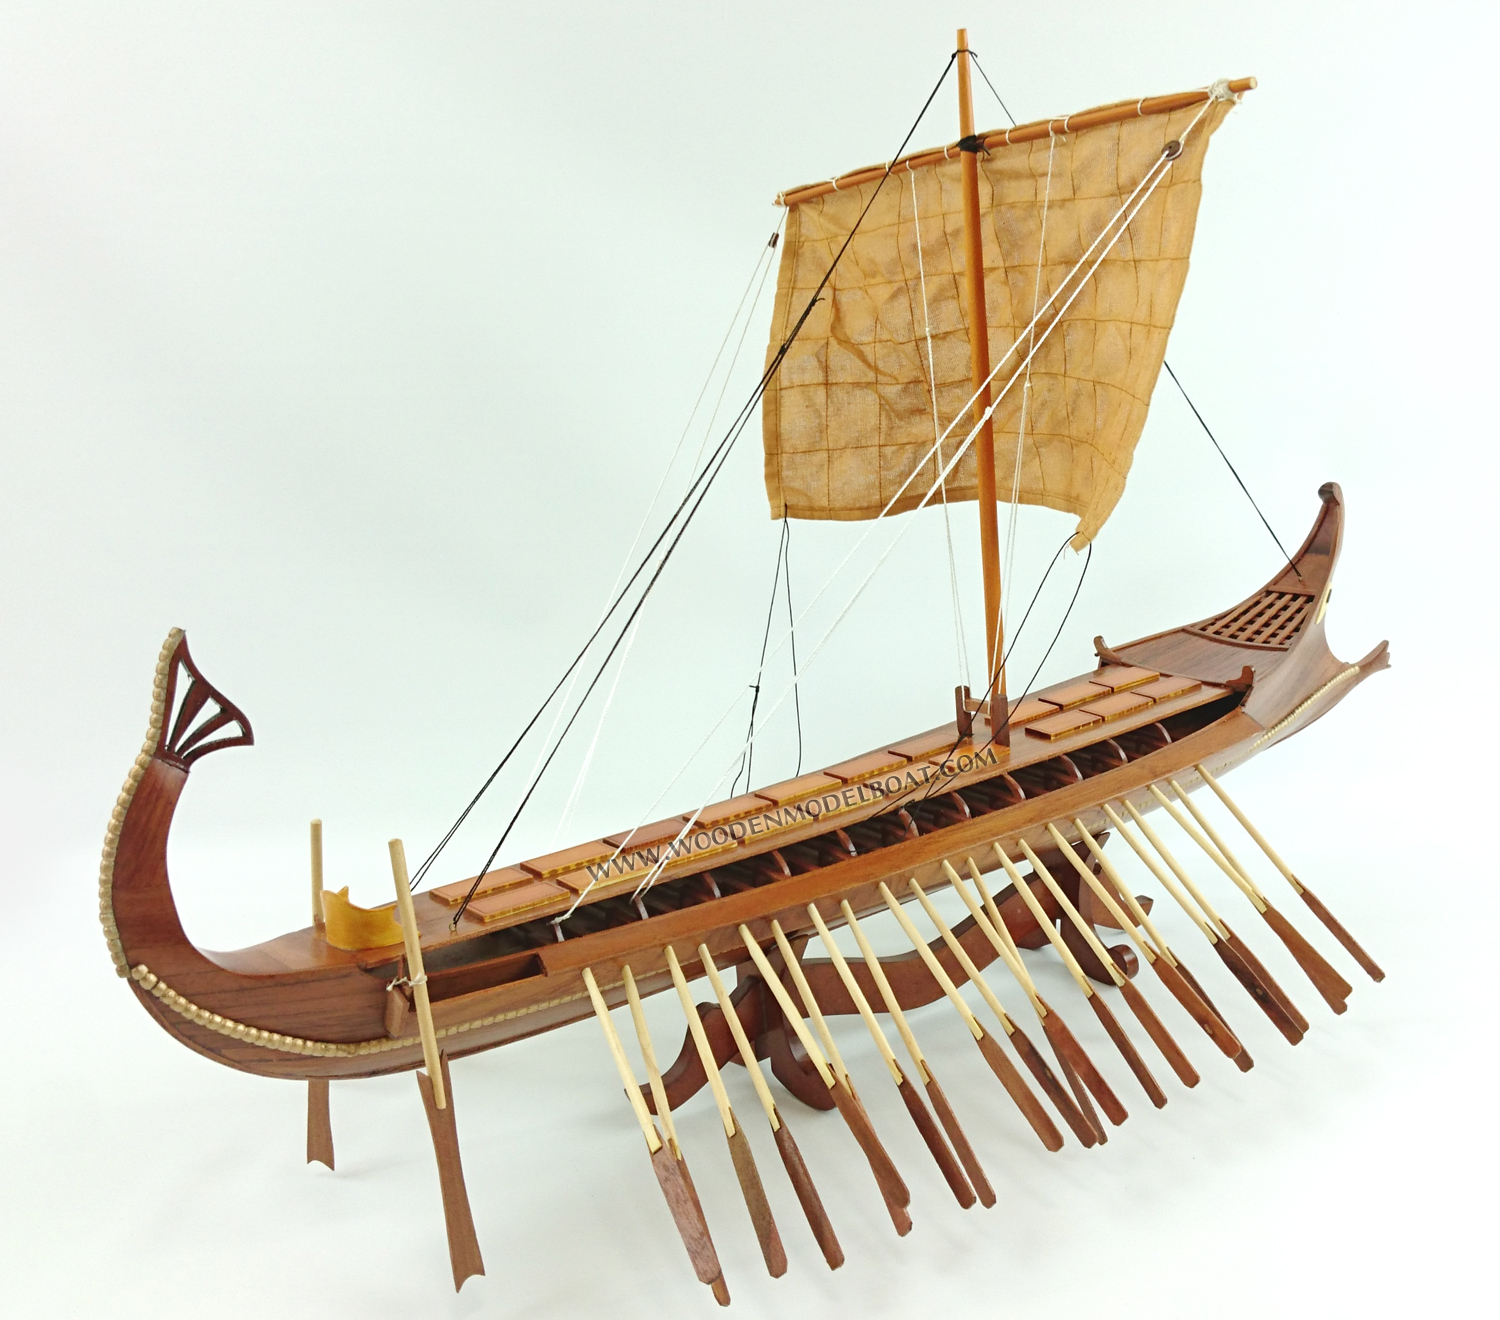 Bireme, ship with two series of oars in each side, was the precursor of trireme and forms the in-between link evolution from pentikoro to subsequent ships. Biremes were made with thirty or fifty oars and the dimensions of these ships are between: 18-22m length, 3-4 m width, 22 tones displacement and the length of the oars 4-6 m. The most famous biremes were made in Samos from tyrant Polykrates and were named samaines. It was a special type of biremes, made in such a way so that could be used as a tanker and as a battle ship in the same time. For greater stability of the ship the Phoenicians lowered the crinolines (platforms where oarsmen sat). A massive bronze covered battering ram was the main weapon of this narrow high speed bireme. The traditional removable rig was typical. A decorative poop extremity of stern was abruptly bent, similarly to a tail of a scorpion, and the balustrade of the battle platform was covered with the shields of warriors for reinforcement. Phoenicians were considered as the best seamen of the time and many ancient states frequently used them as mercenaries.